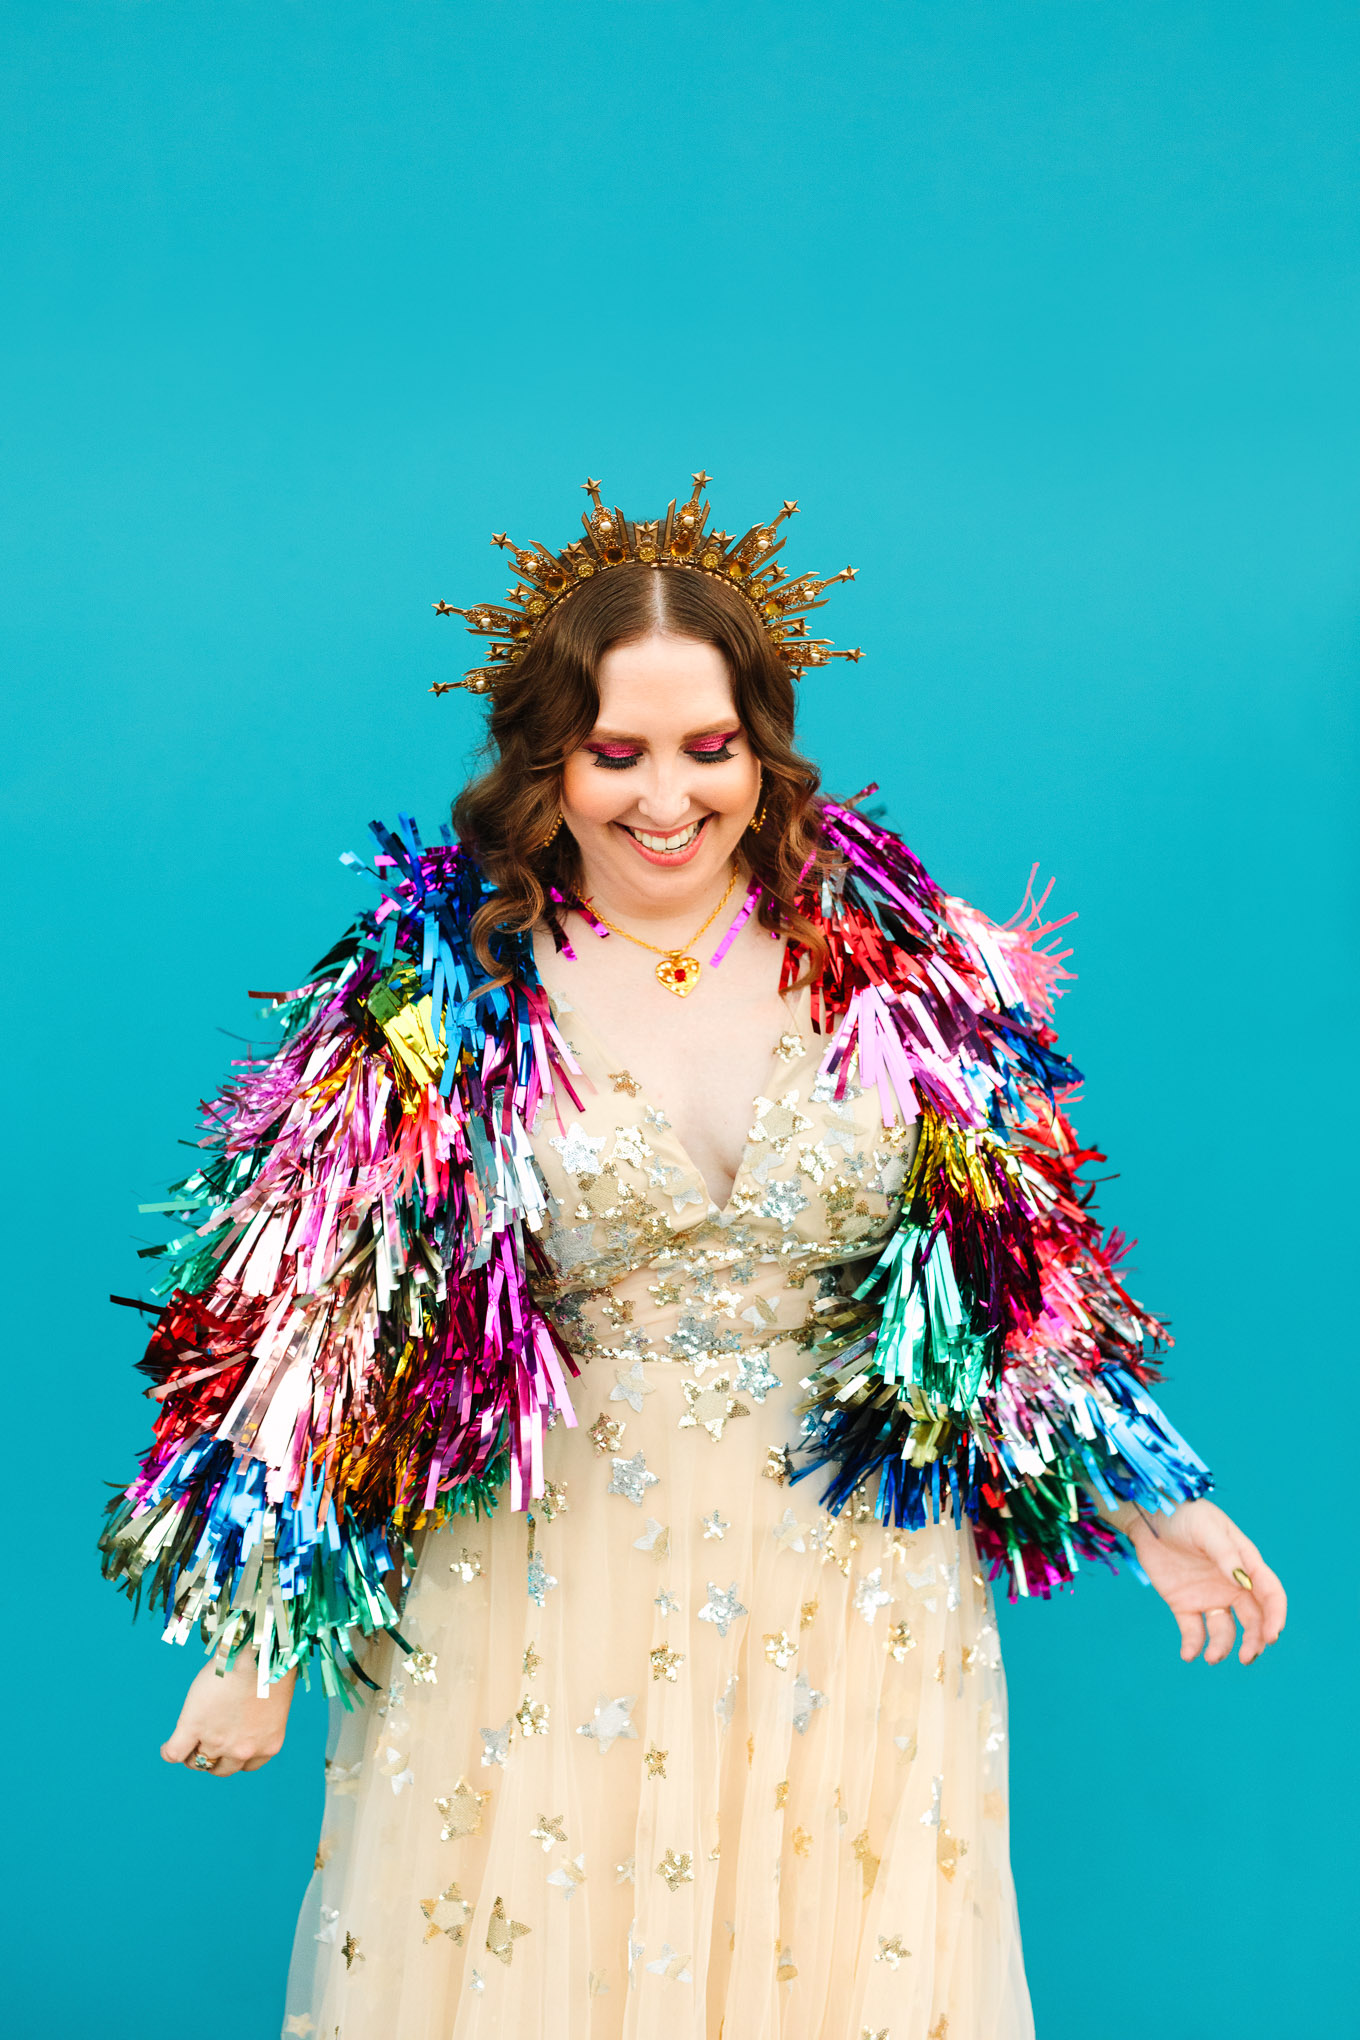 Bride in colorful tinsel jacket by Rachel Burke | Colorful Downtown Los Angeles Valentine Wedding | Los Angeles wedding photographer | #losangeleswedding #colorfulwedding #DTLA #valentinedtla   Source: Mary Costa Photography | Los Angeles